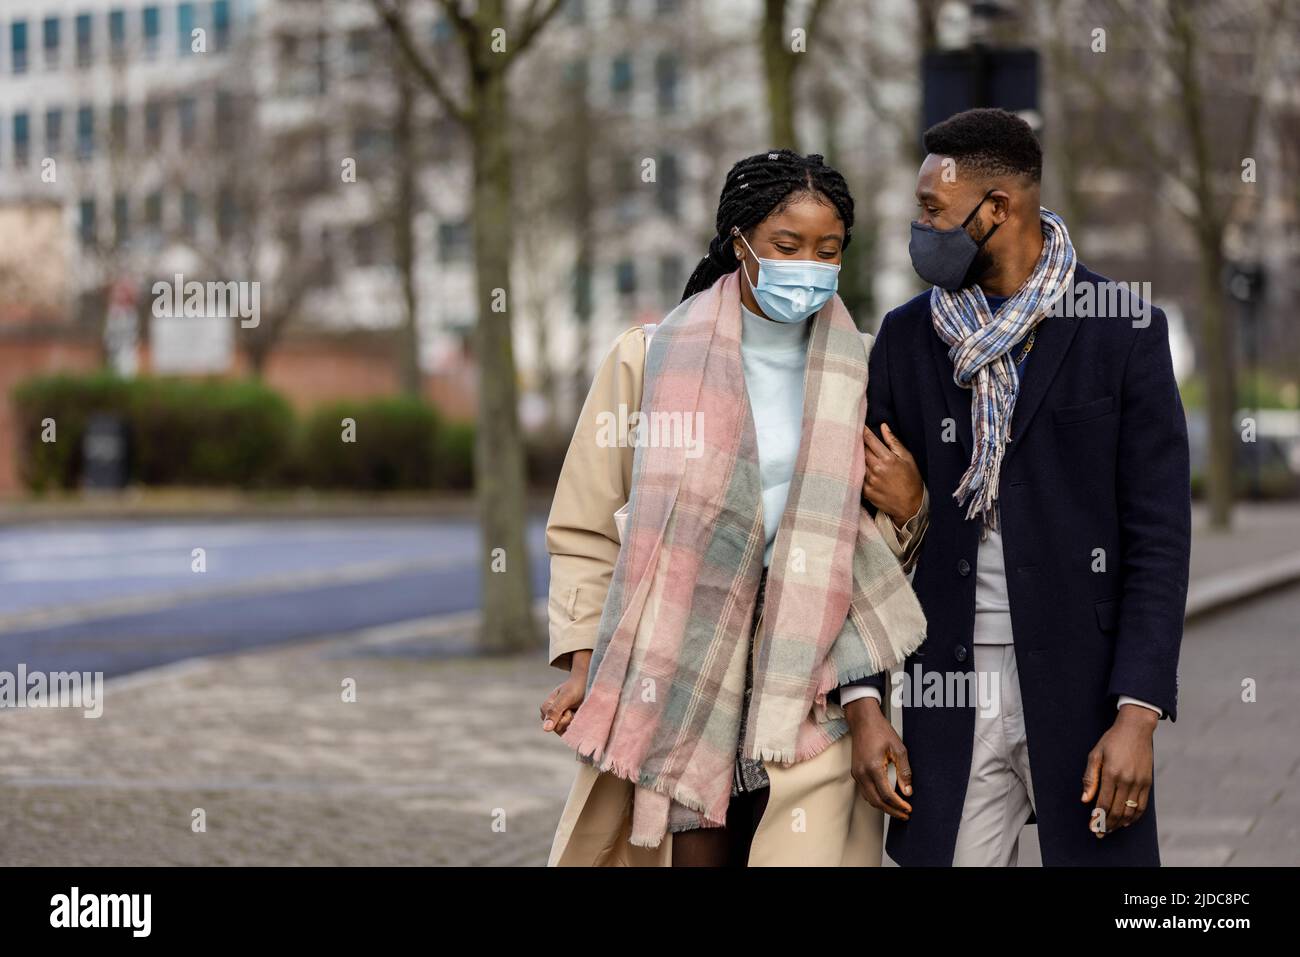 Couple with face coveings walking arm in arm in city cente Stock Photo